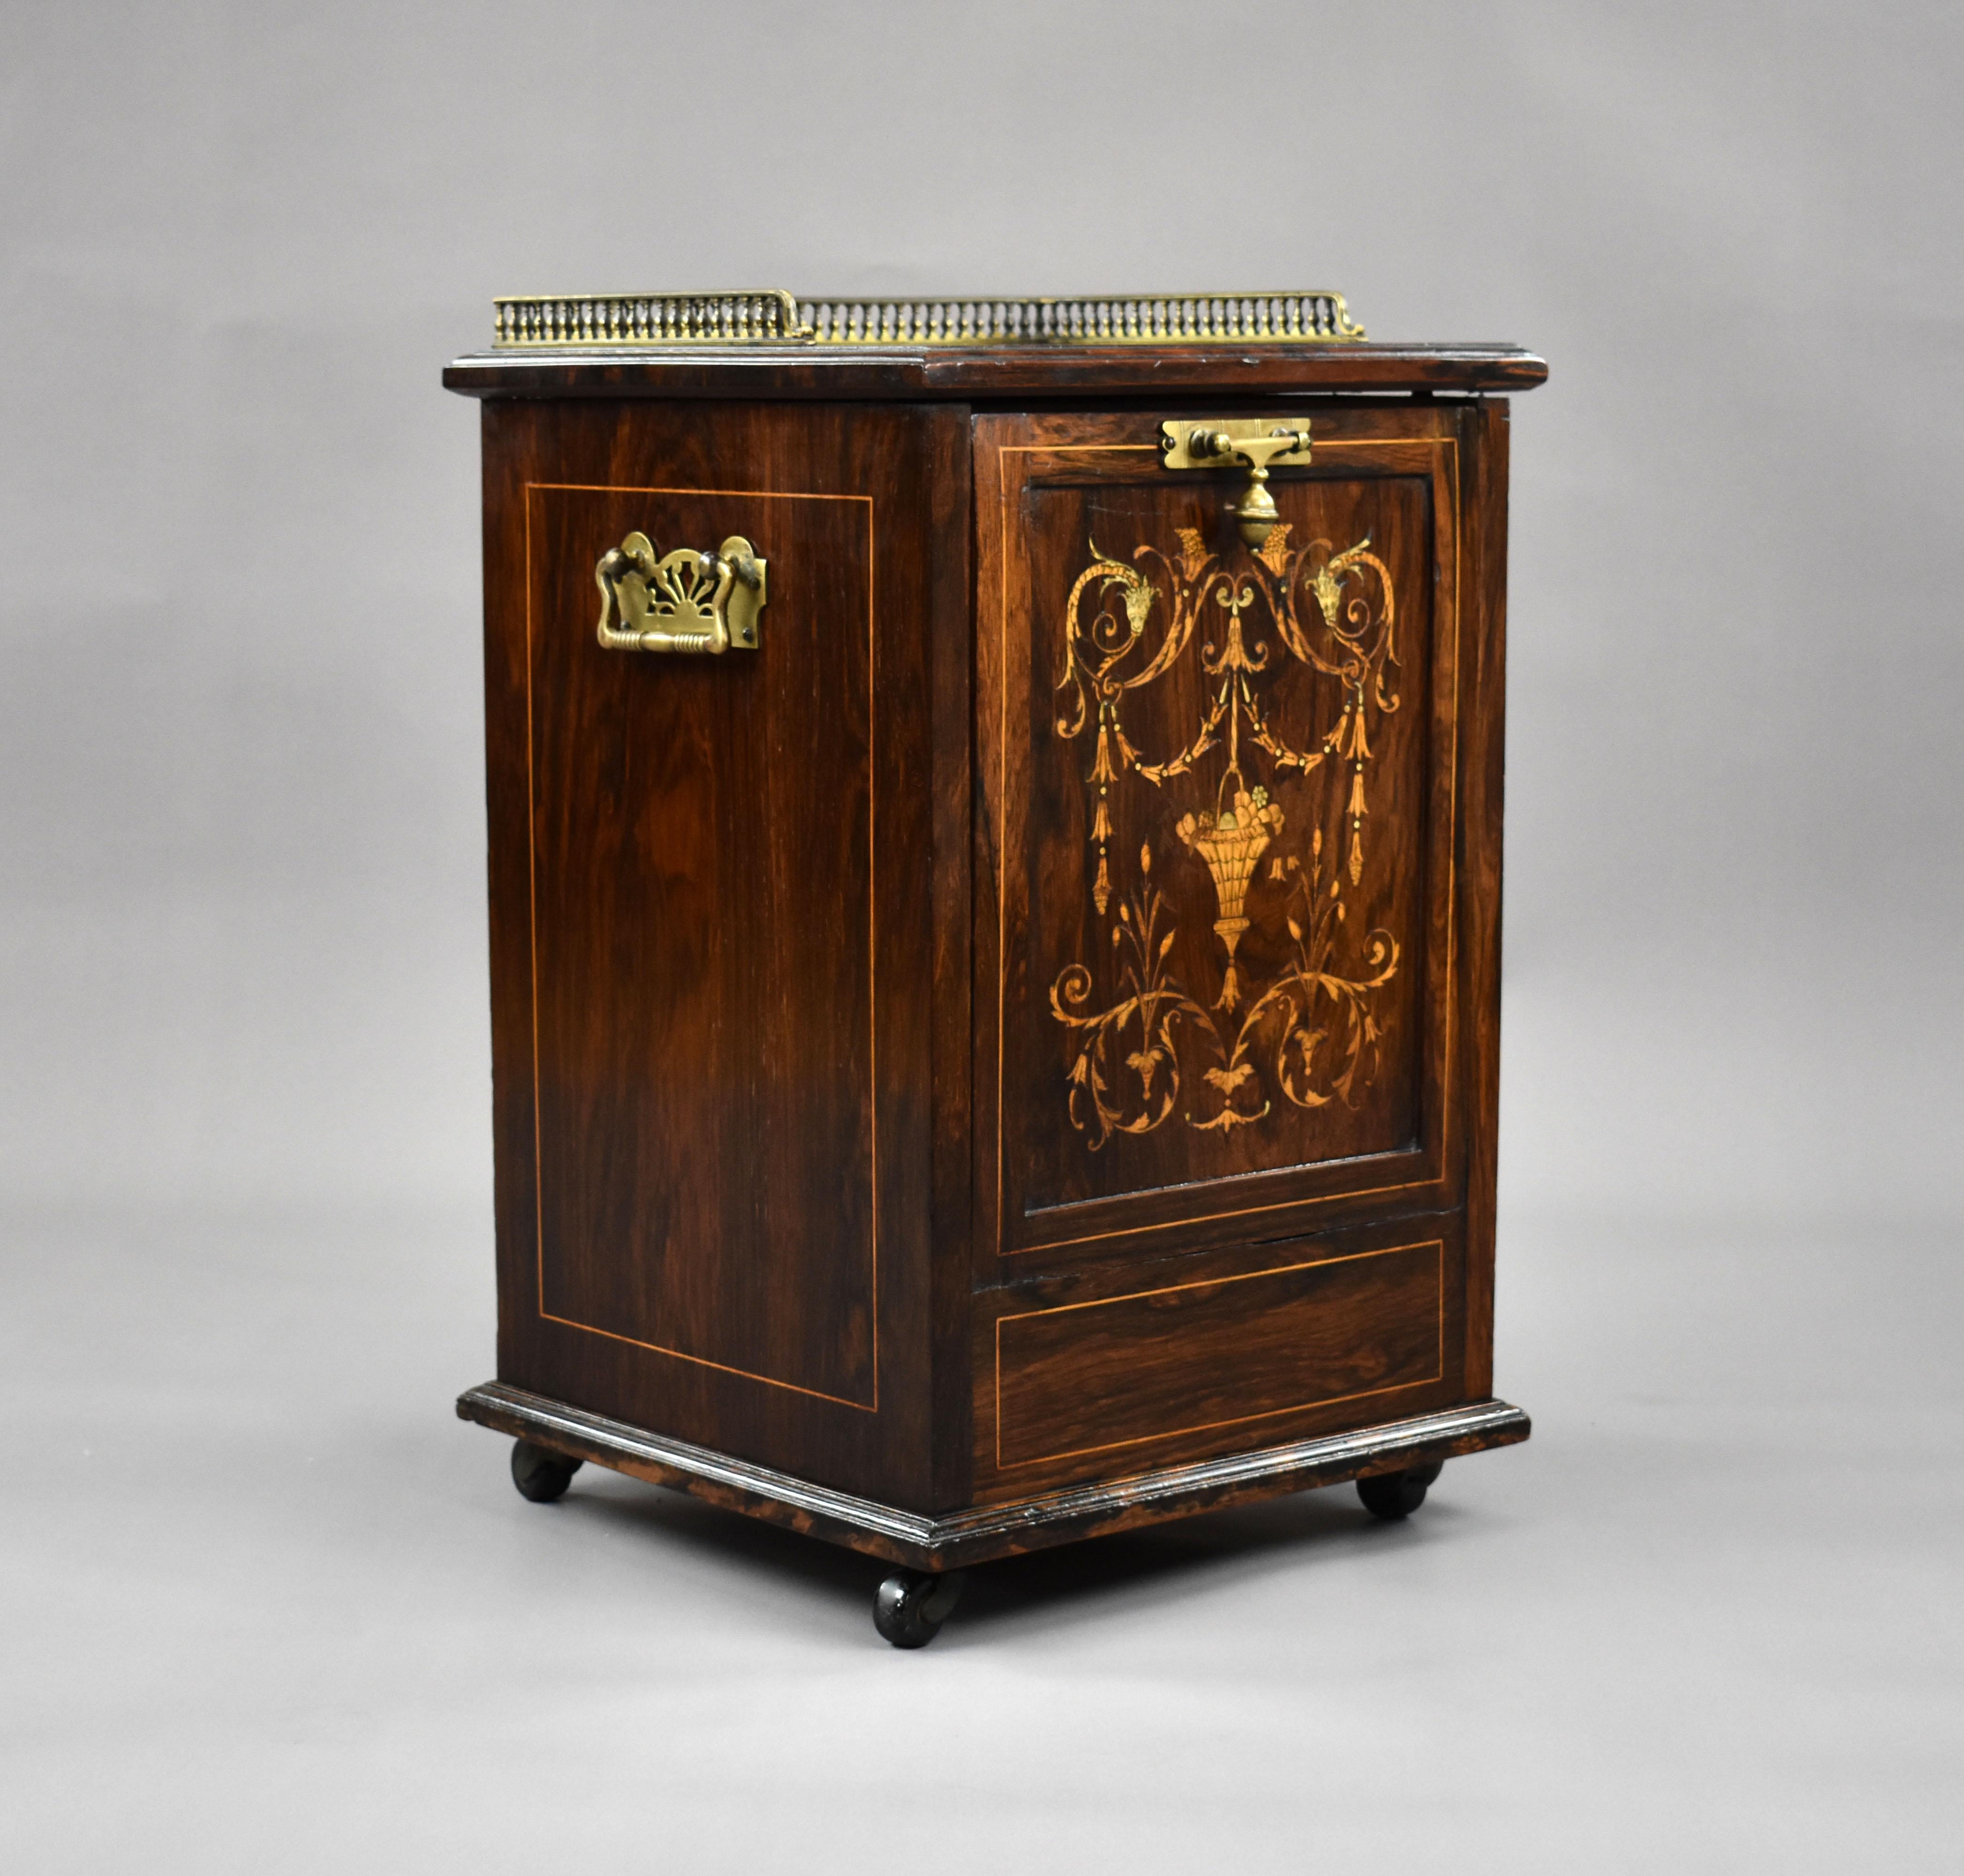 For sale is a good quality Victorian rosewood and marquetry inlaid coal purdonium by Jas Shoolbred, remaining in very good condition for its age.